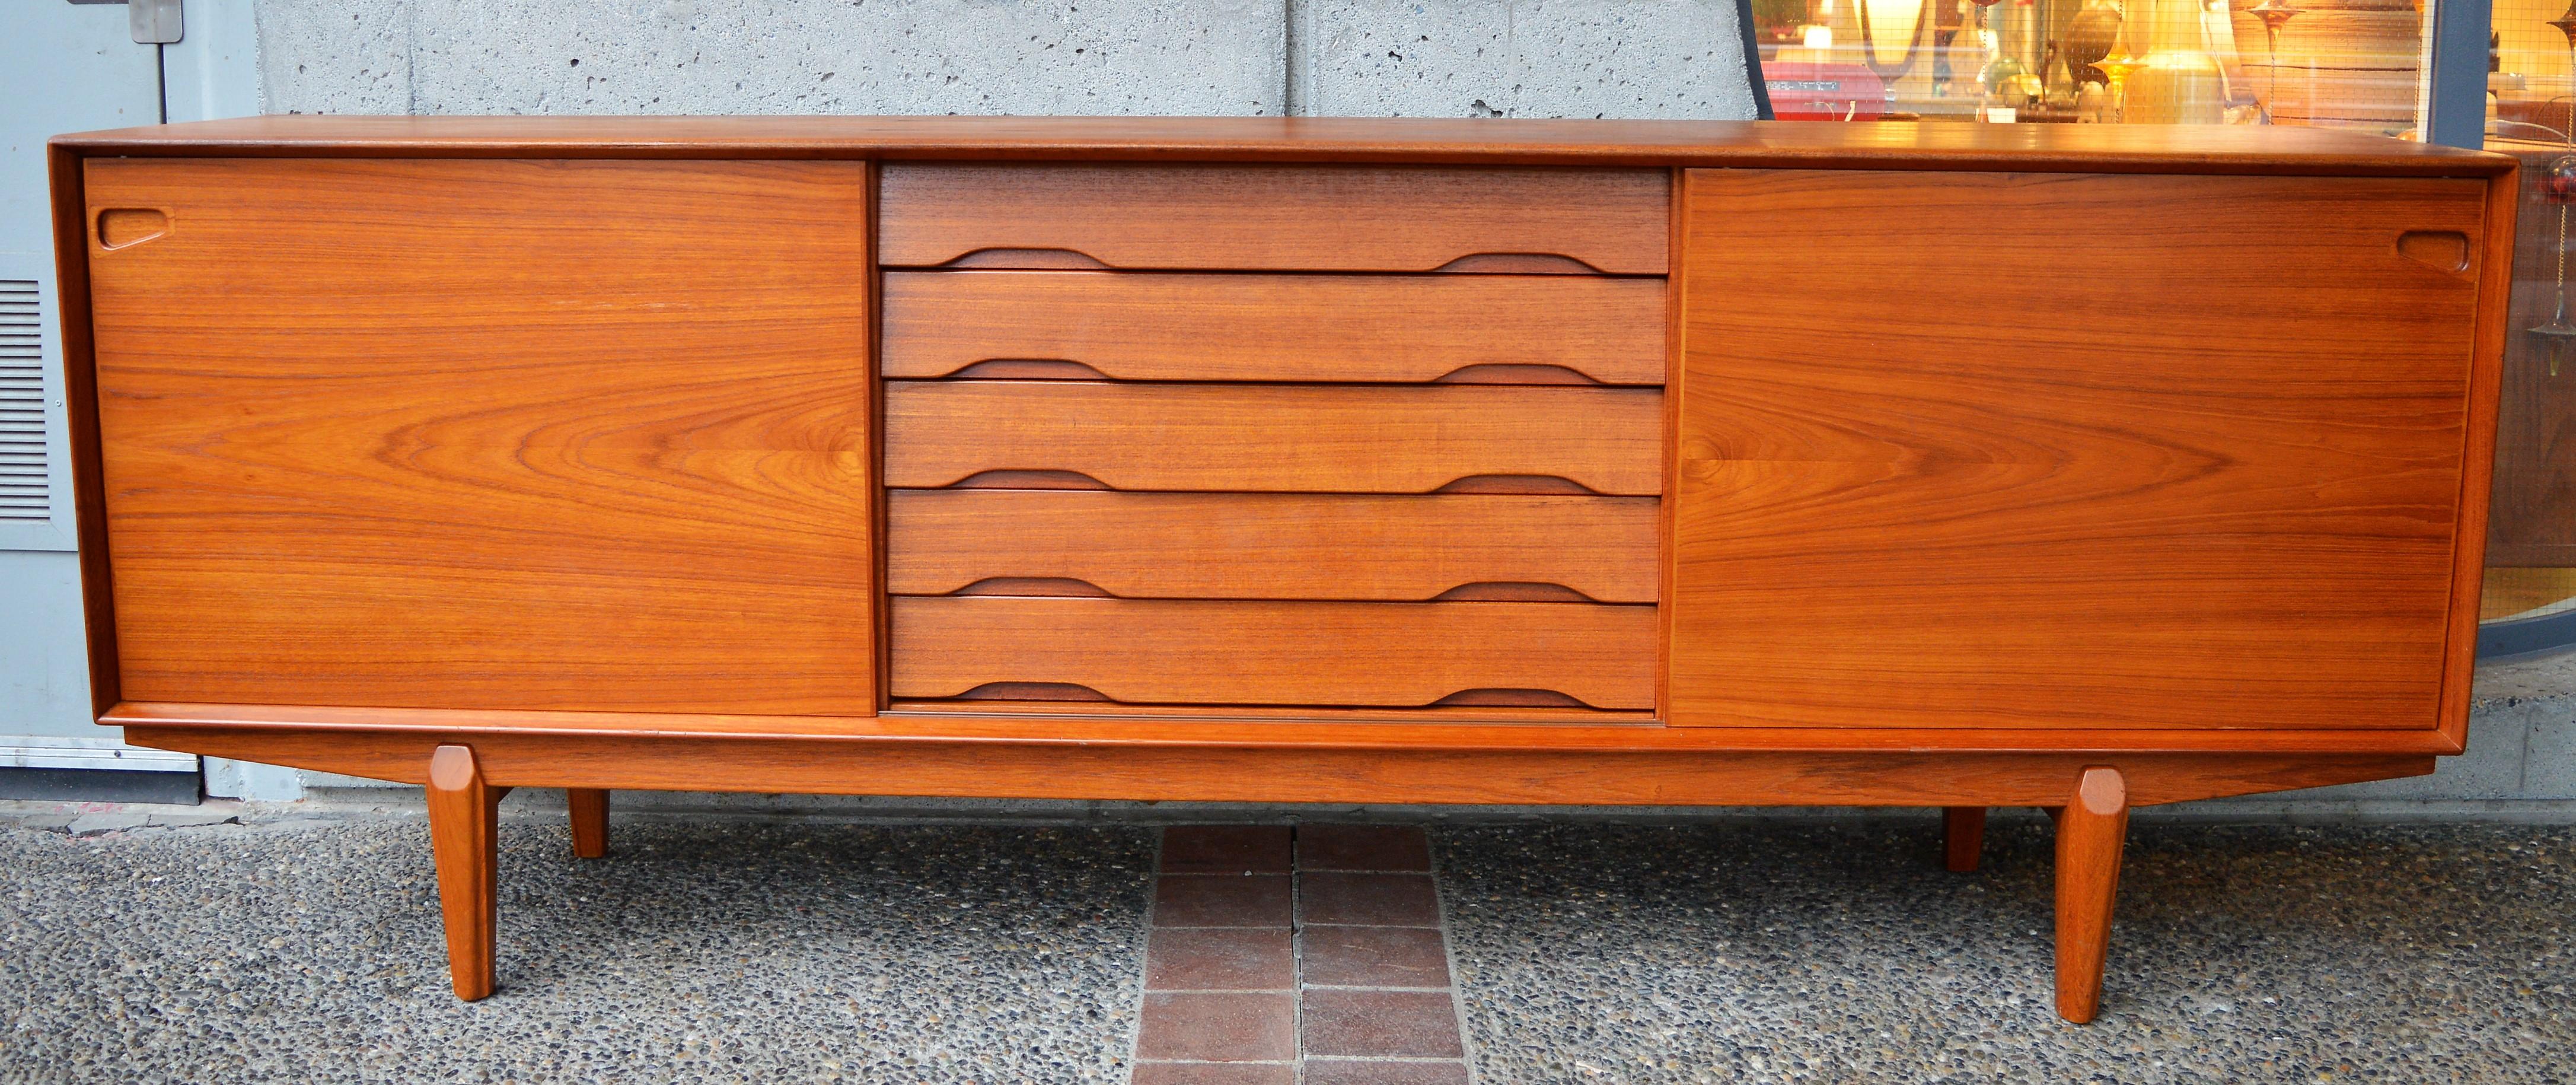 Dyrlund Teak Credenza by Rosengren Hansen with Louver Drawers and Finished Back 6